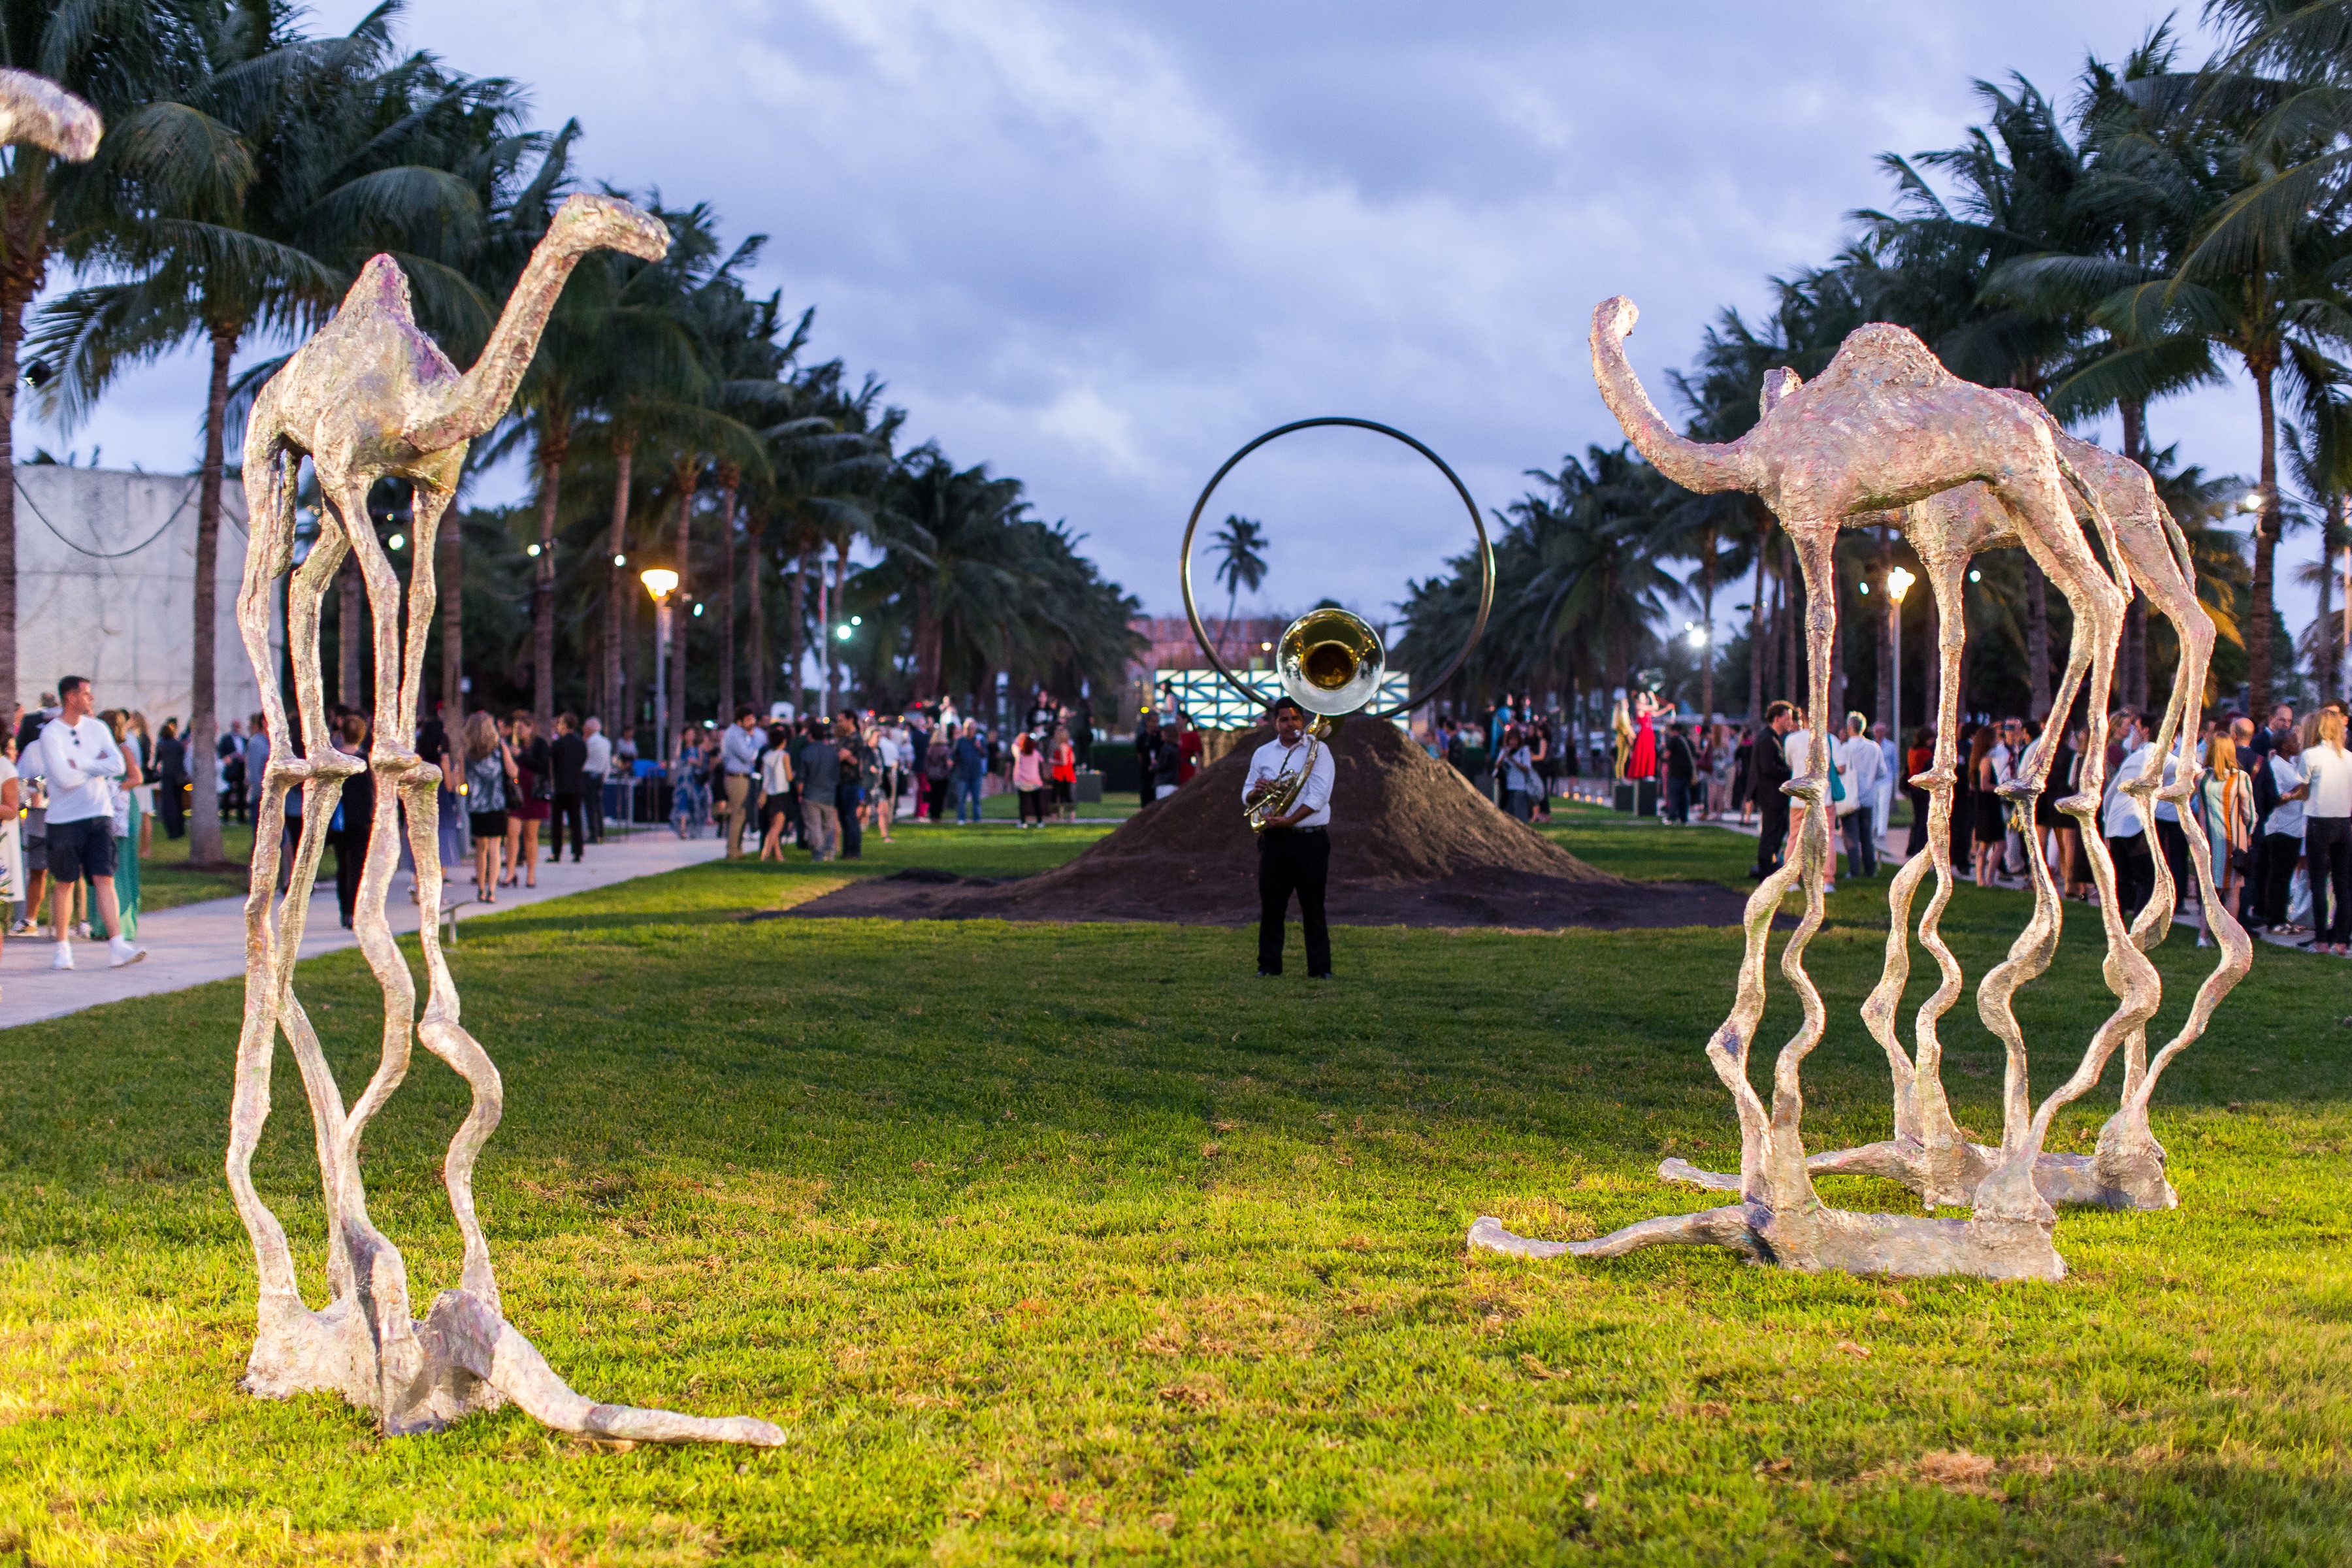 The Best Public Pop-Ups and Installations to See During Art Basel